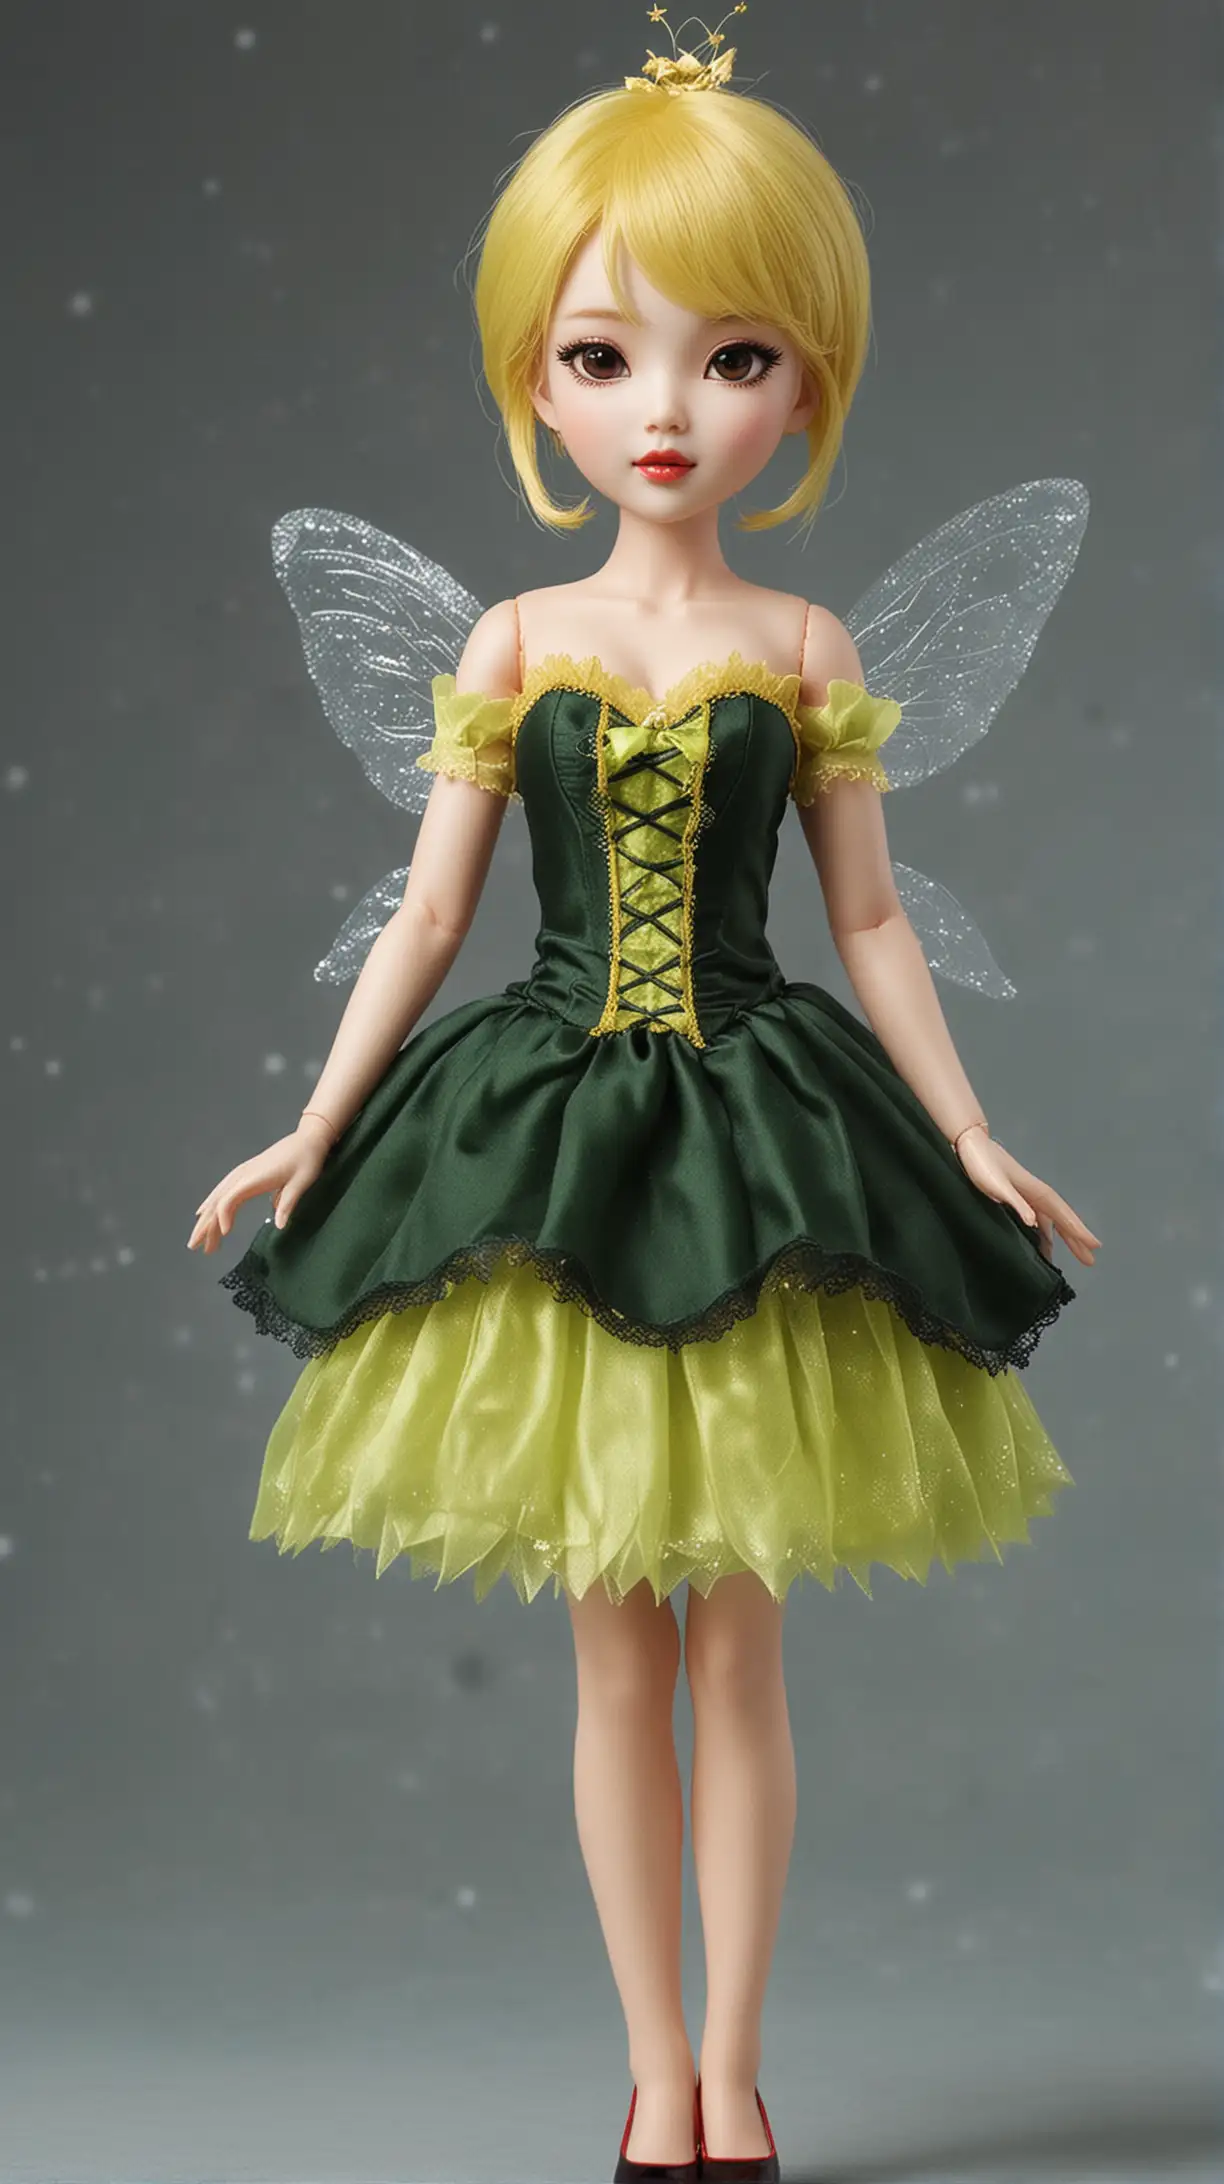 Kim Hye-yoon Beautiful Doll. black and yellow hair. wearing a green Tinkerbell costume. Red Shoes.